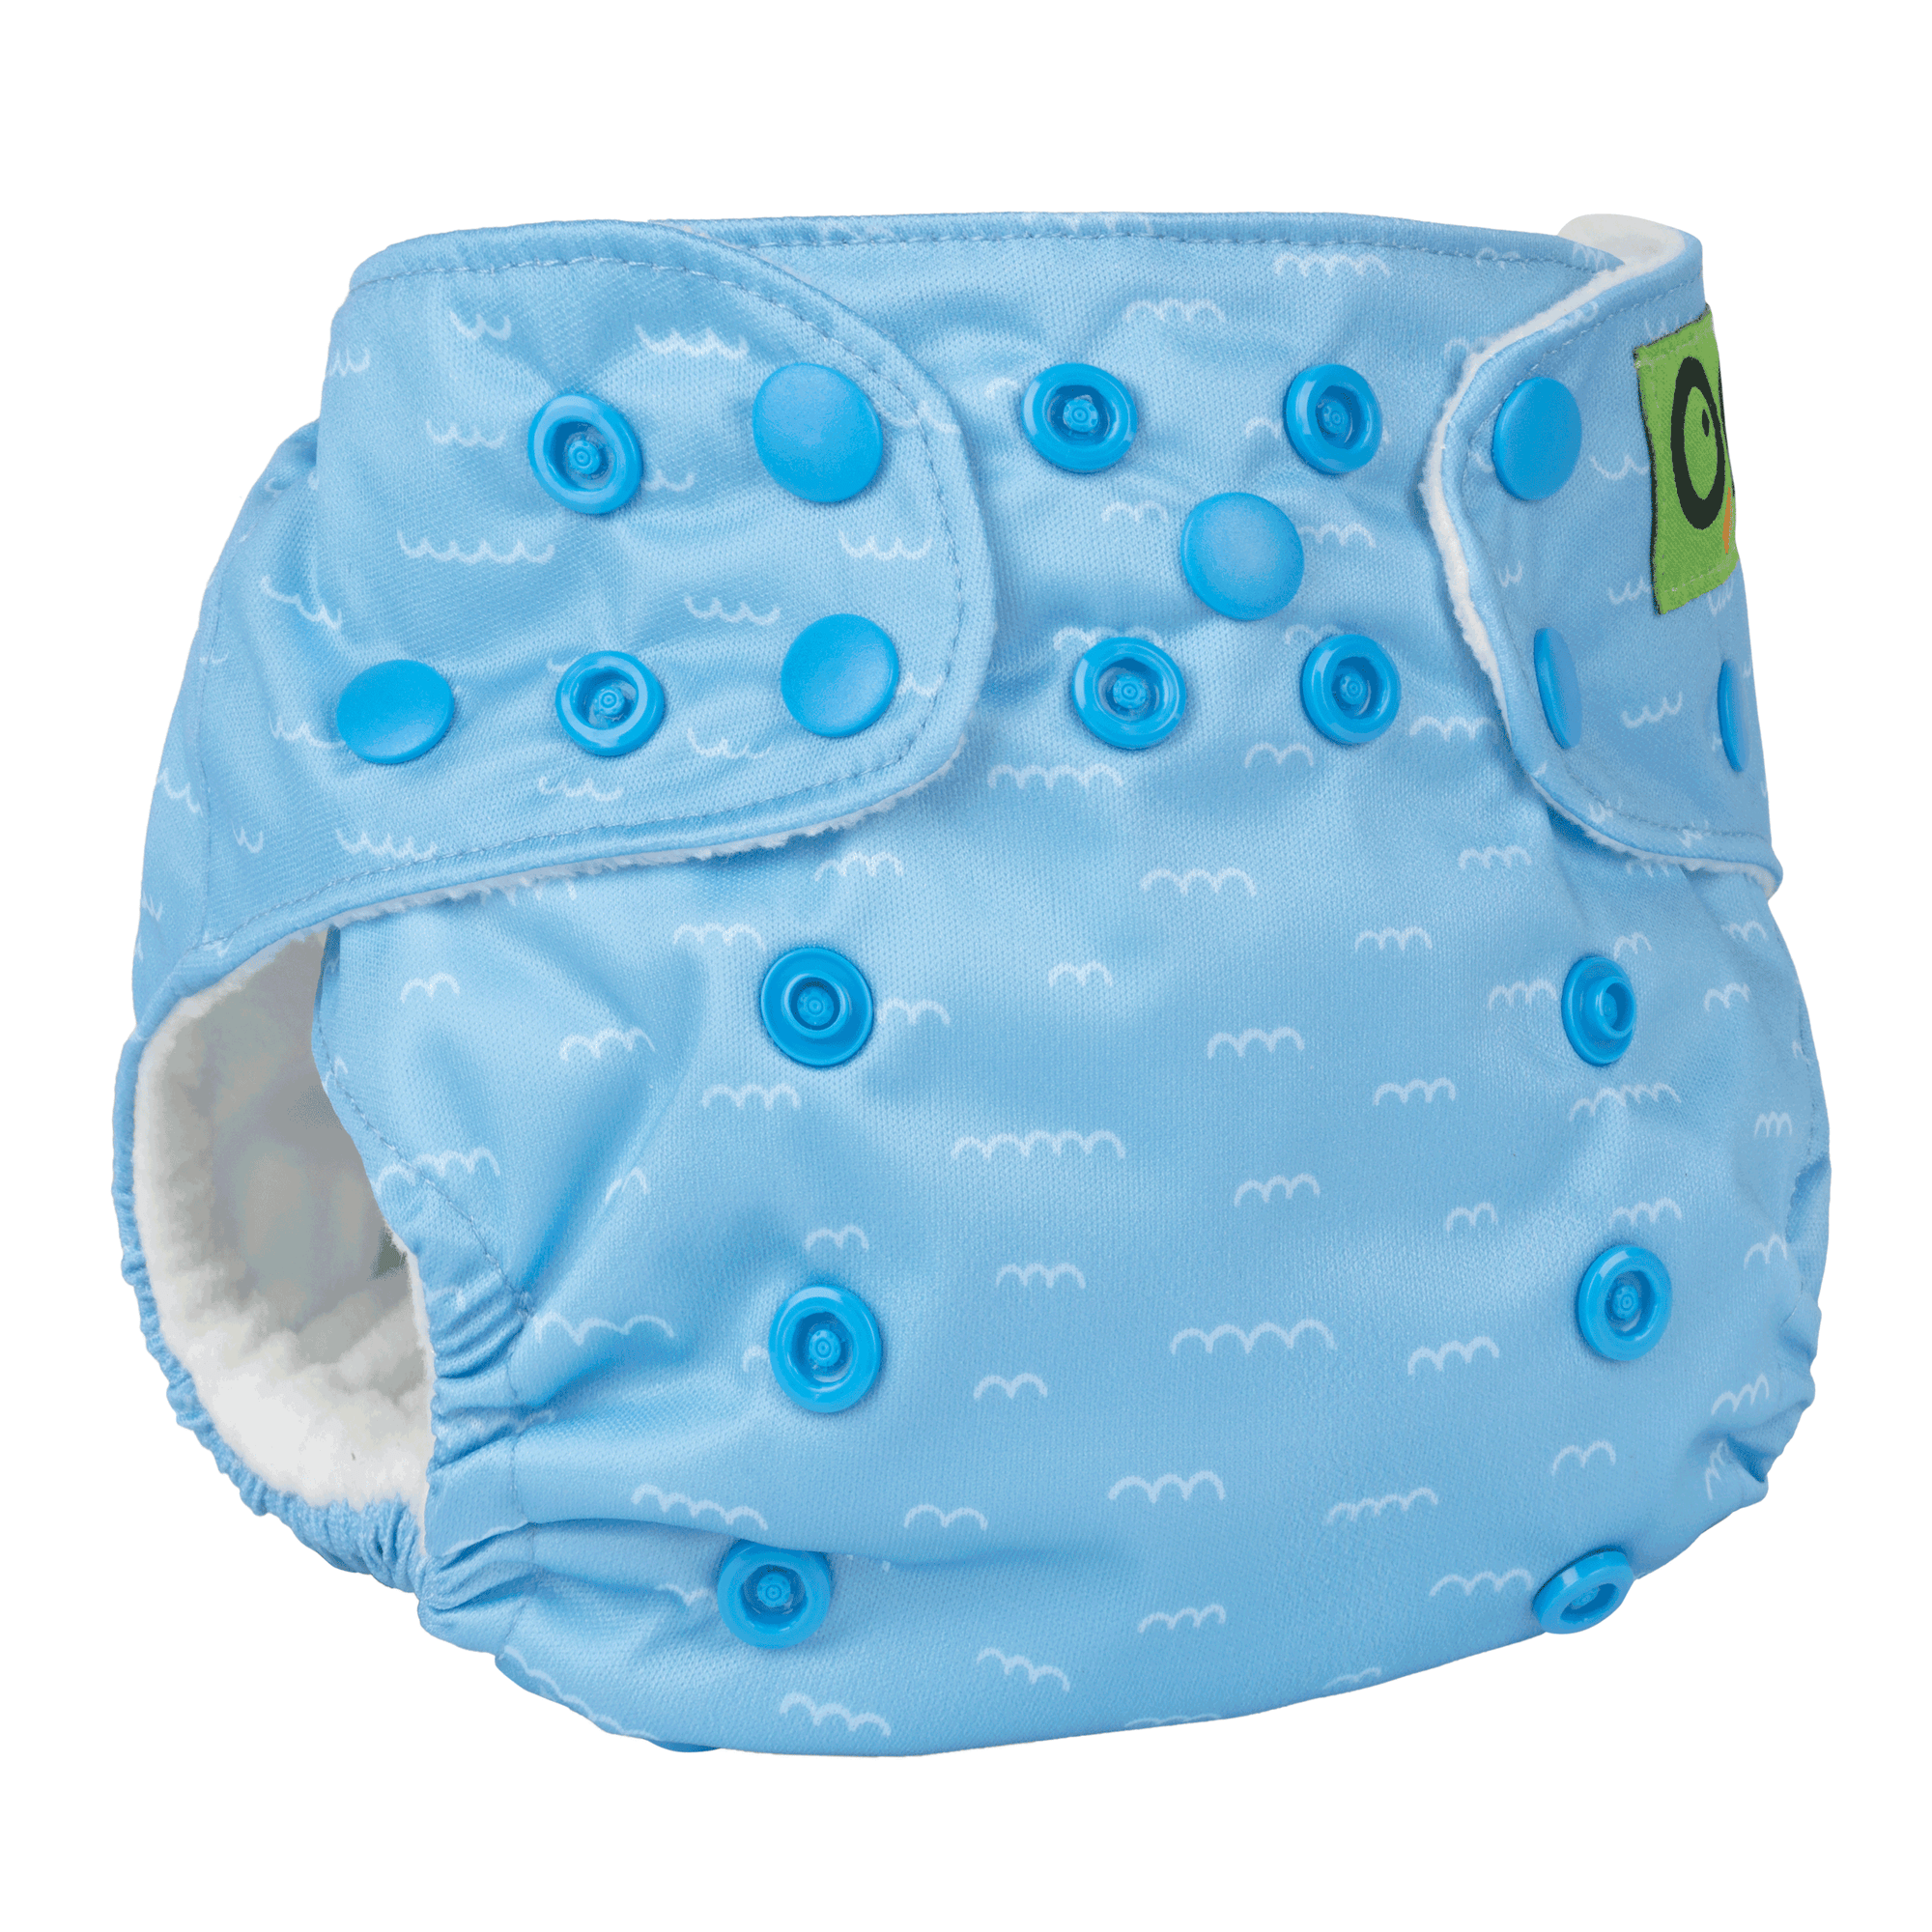 Baby Products Online - 50 Pieces 2.4 Inch Animal Pattern Diaper